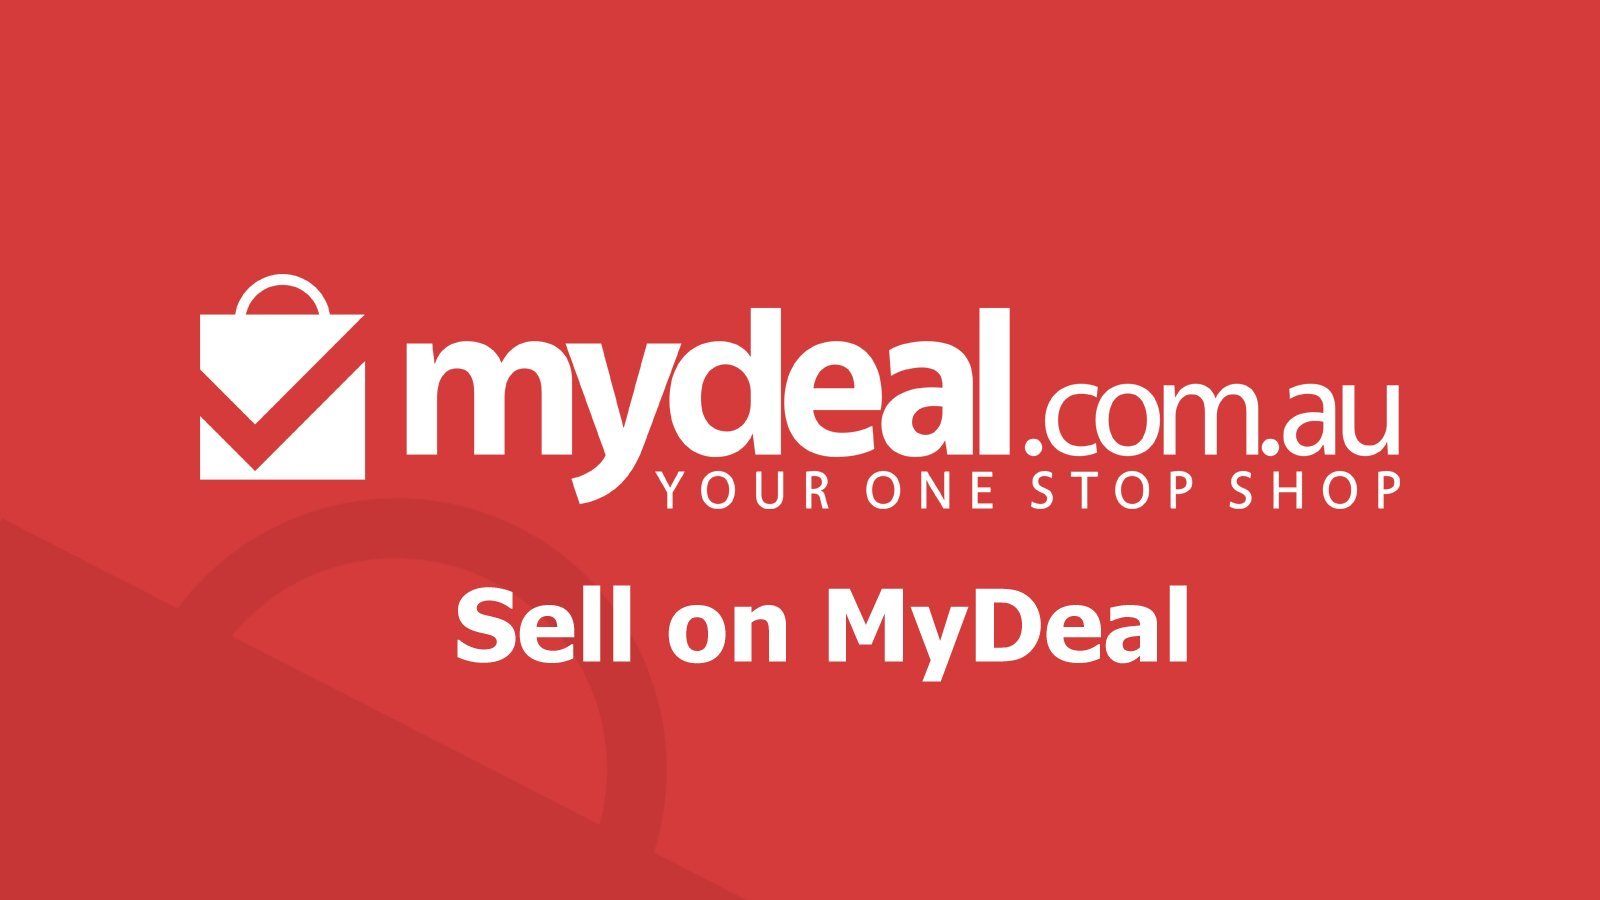 Selling on MyDeal - A Retailer’s Guide to Starting Out